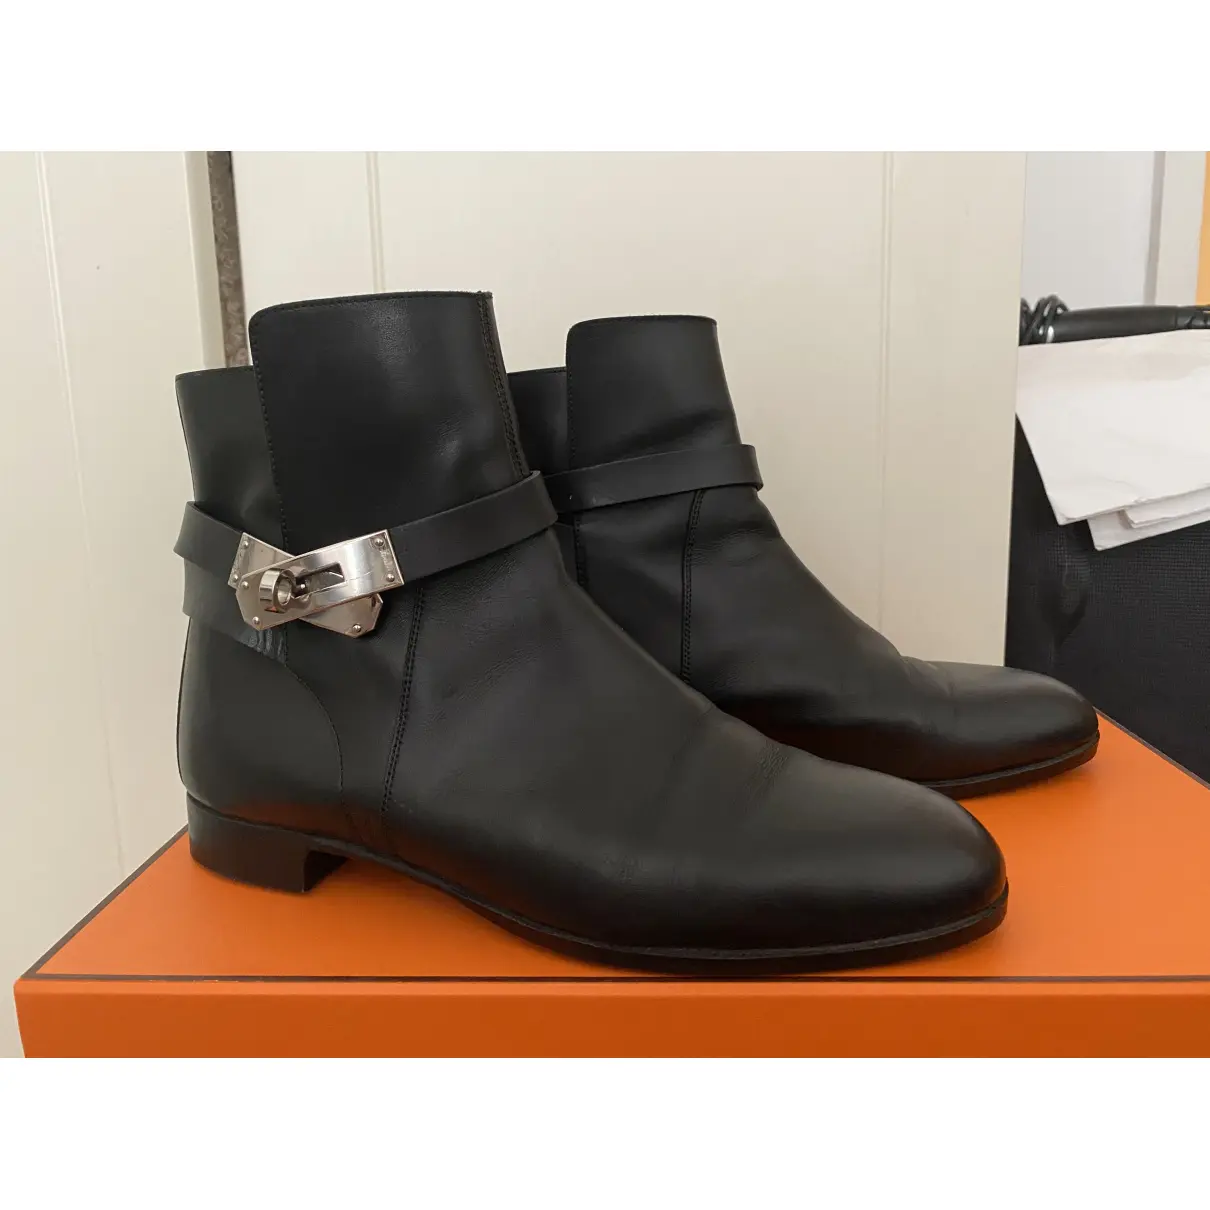 Buy Hermès Néo leather ankle boots online